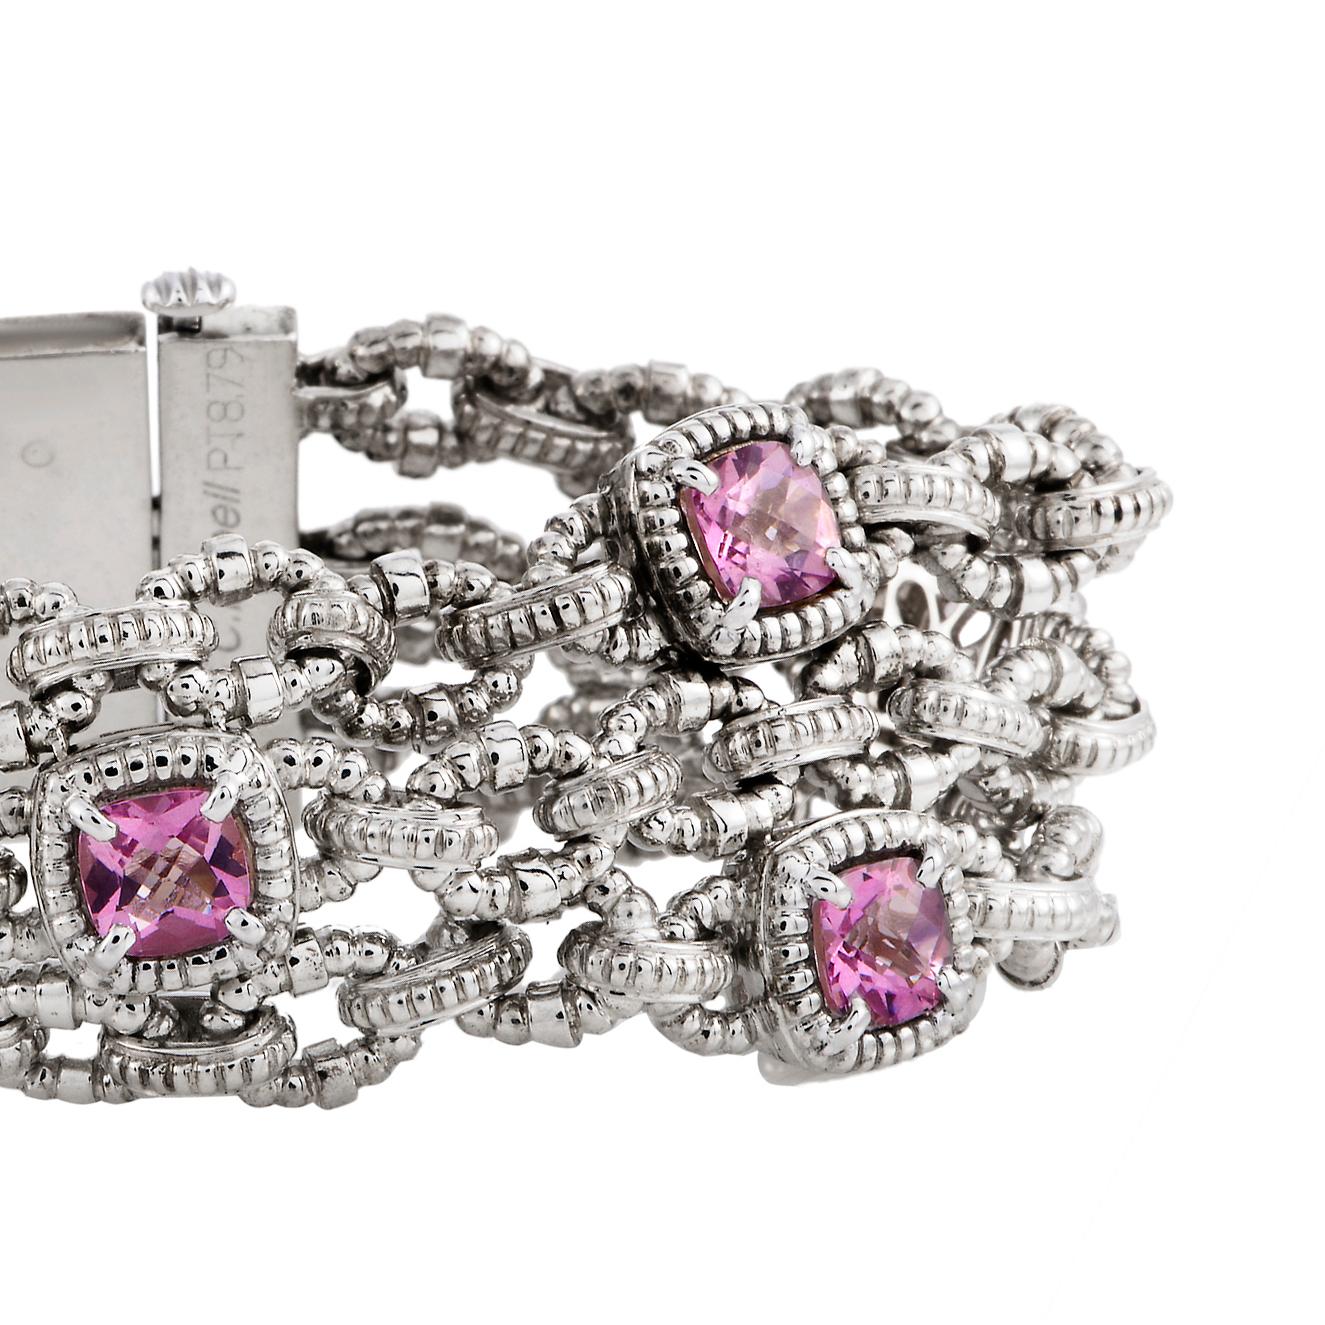 Women's Charles Krypell White Gold and Silver Pink Tourmaline Multi-Row Chain Bracelet